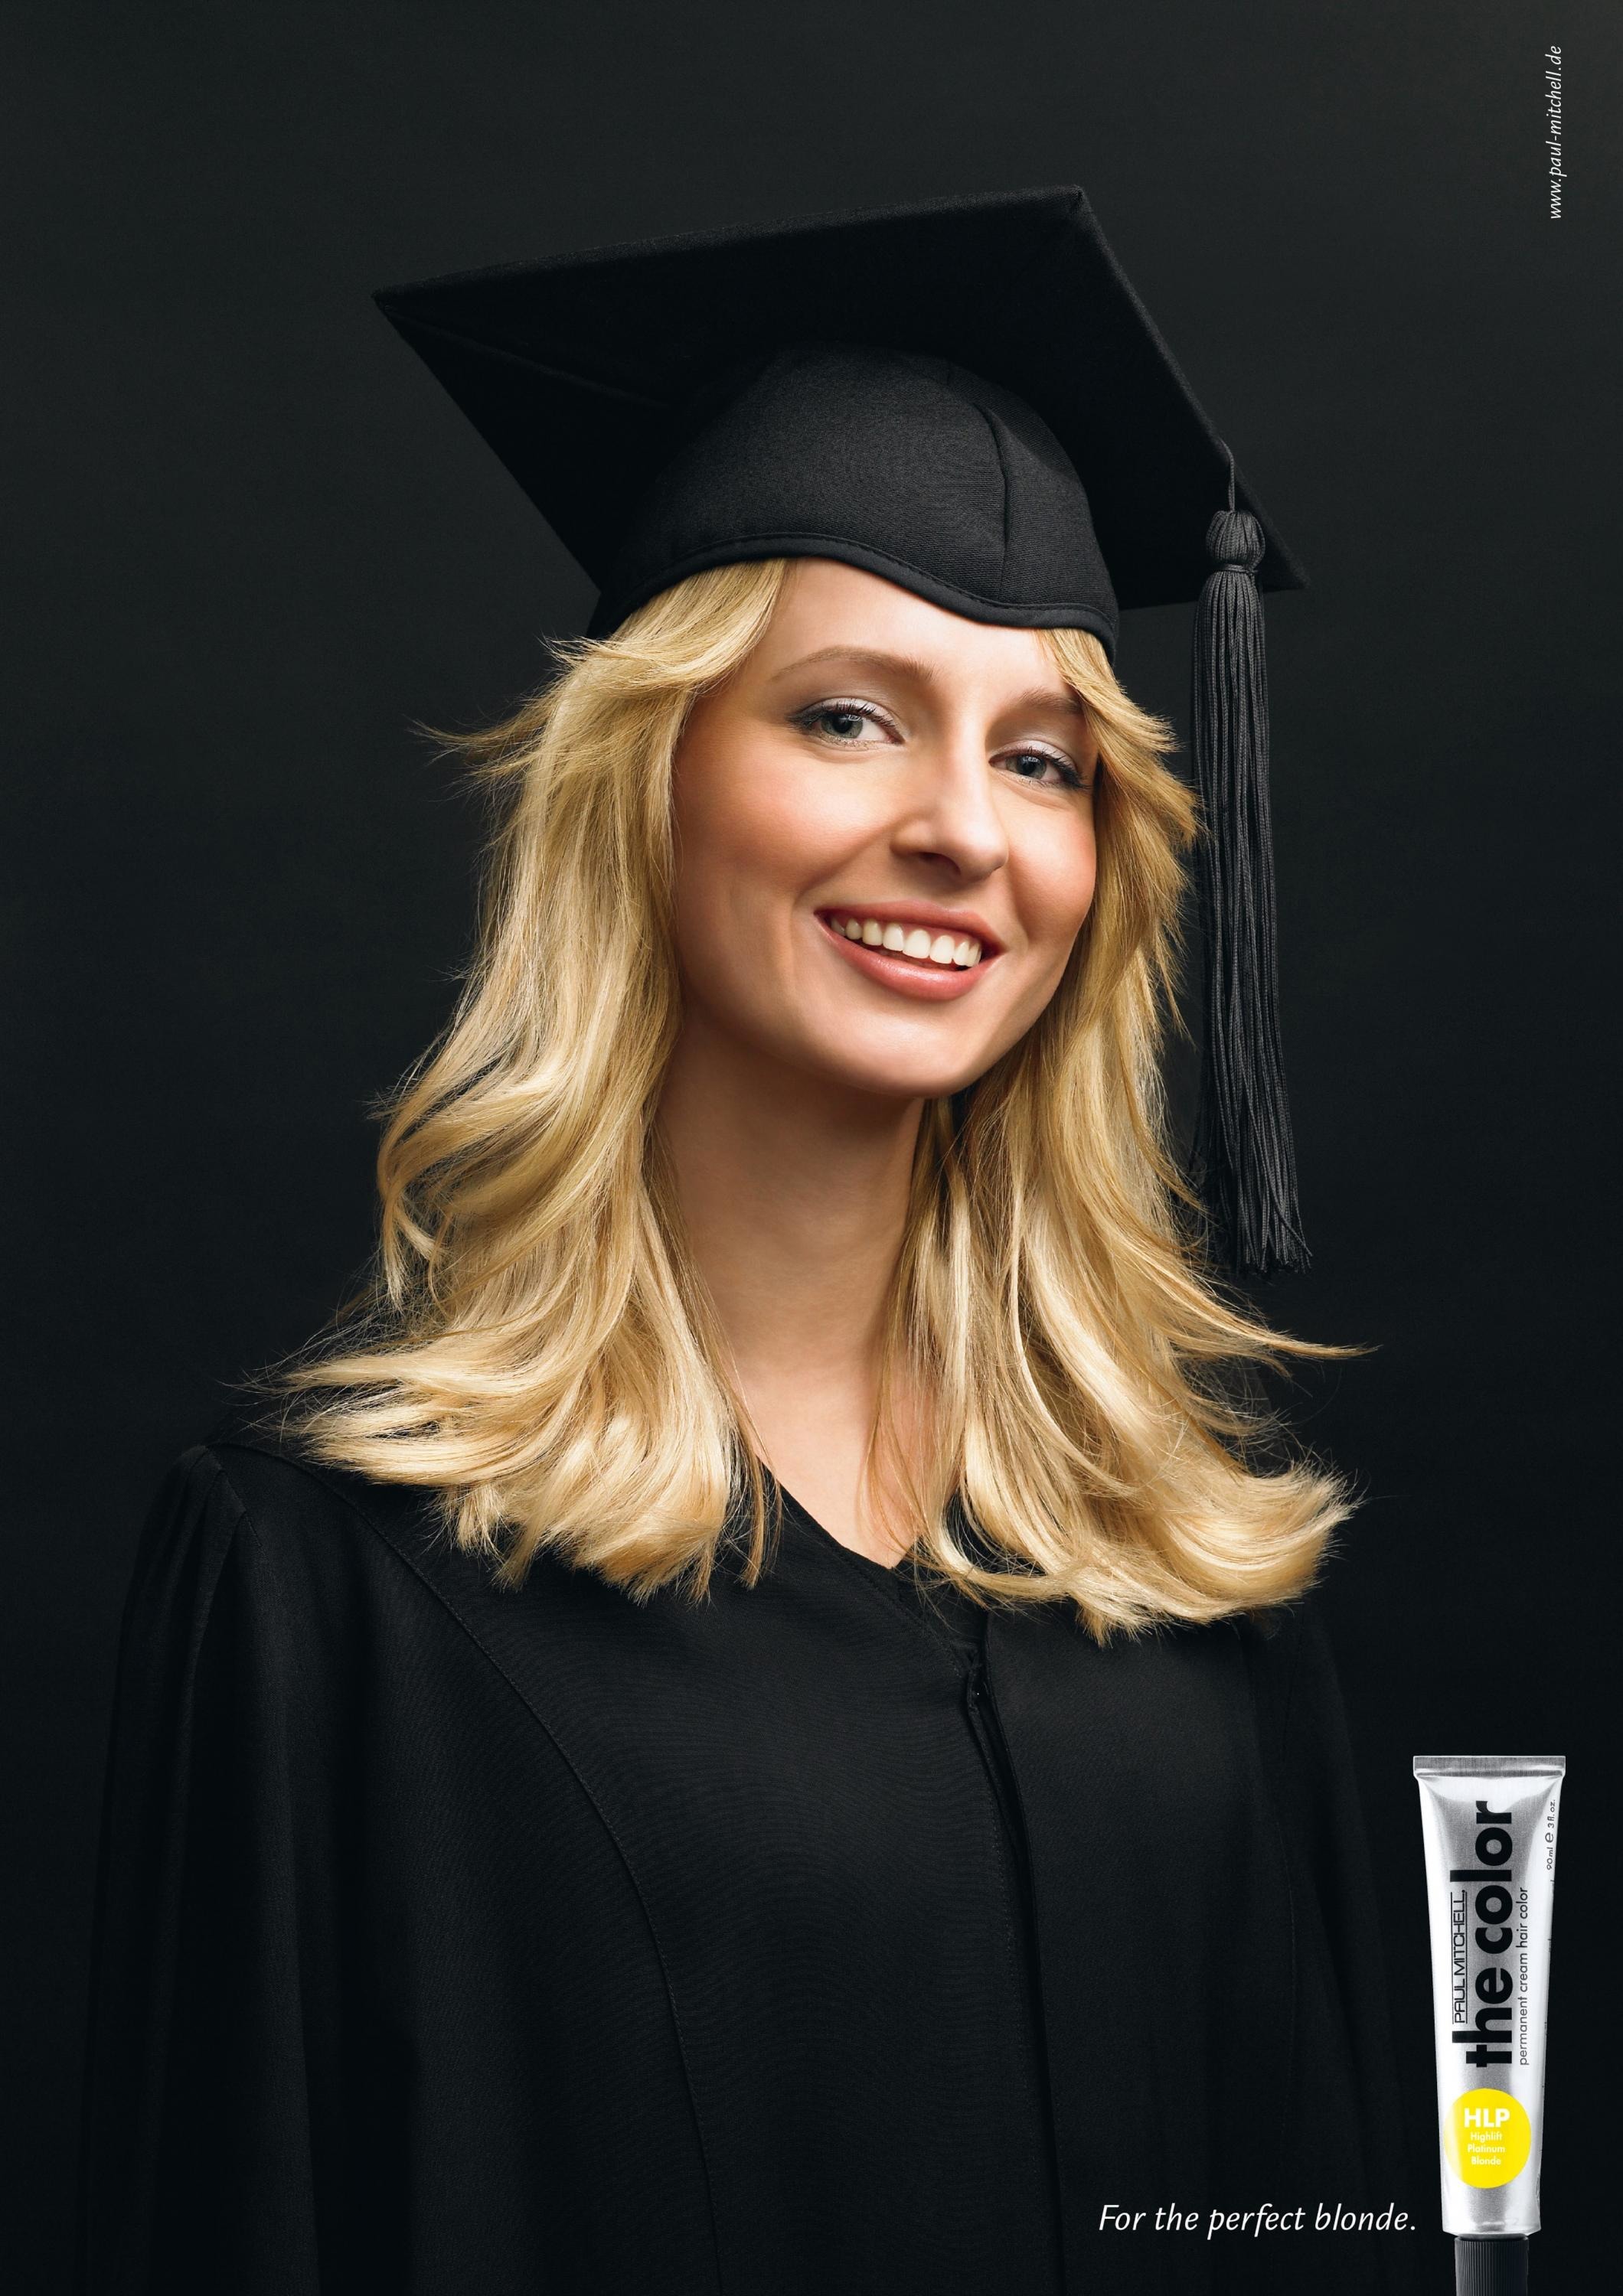 PAUL MITCHELL THE COLOUR - NATURAL BLONDE